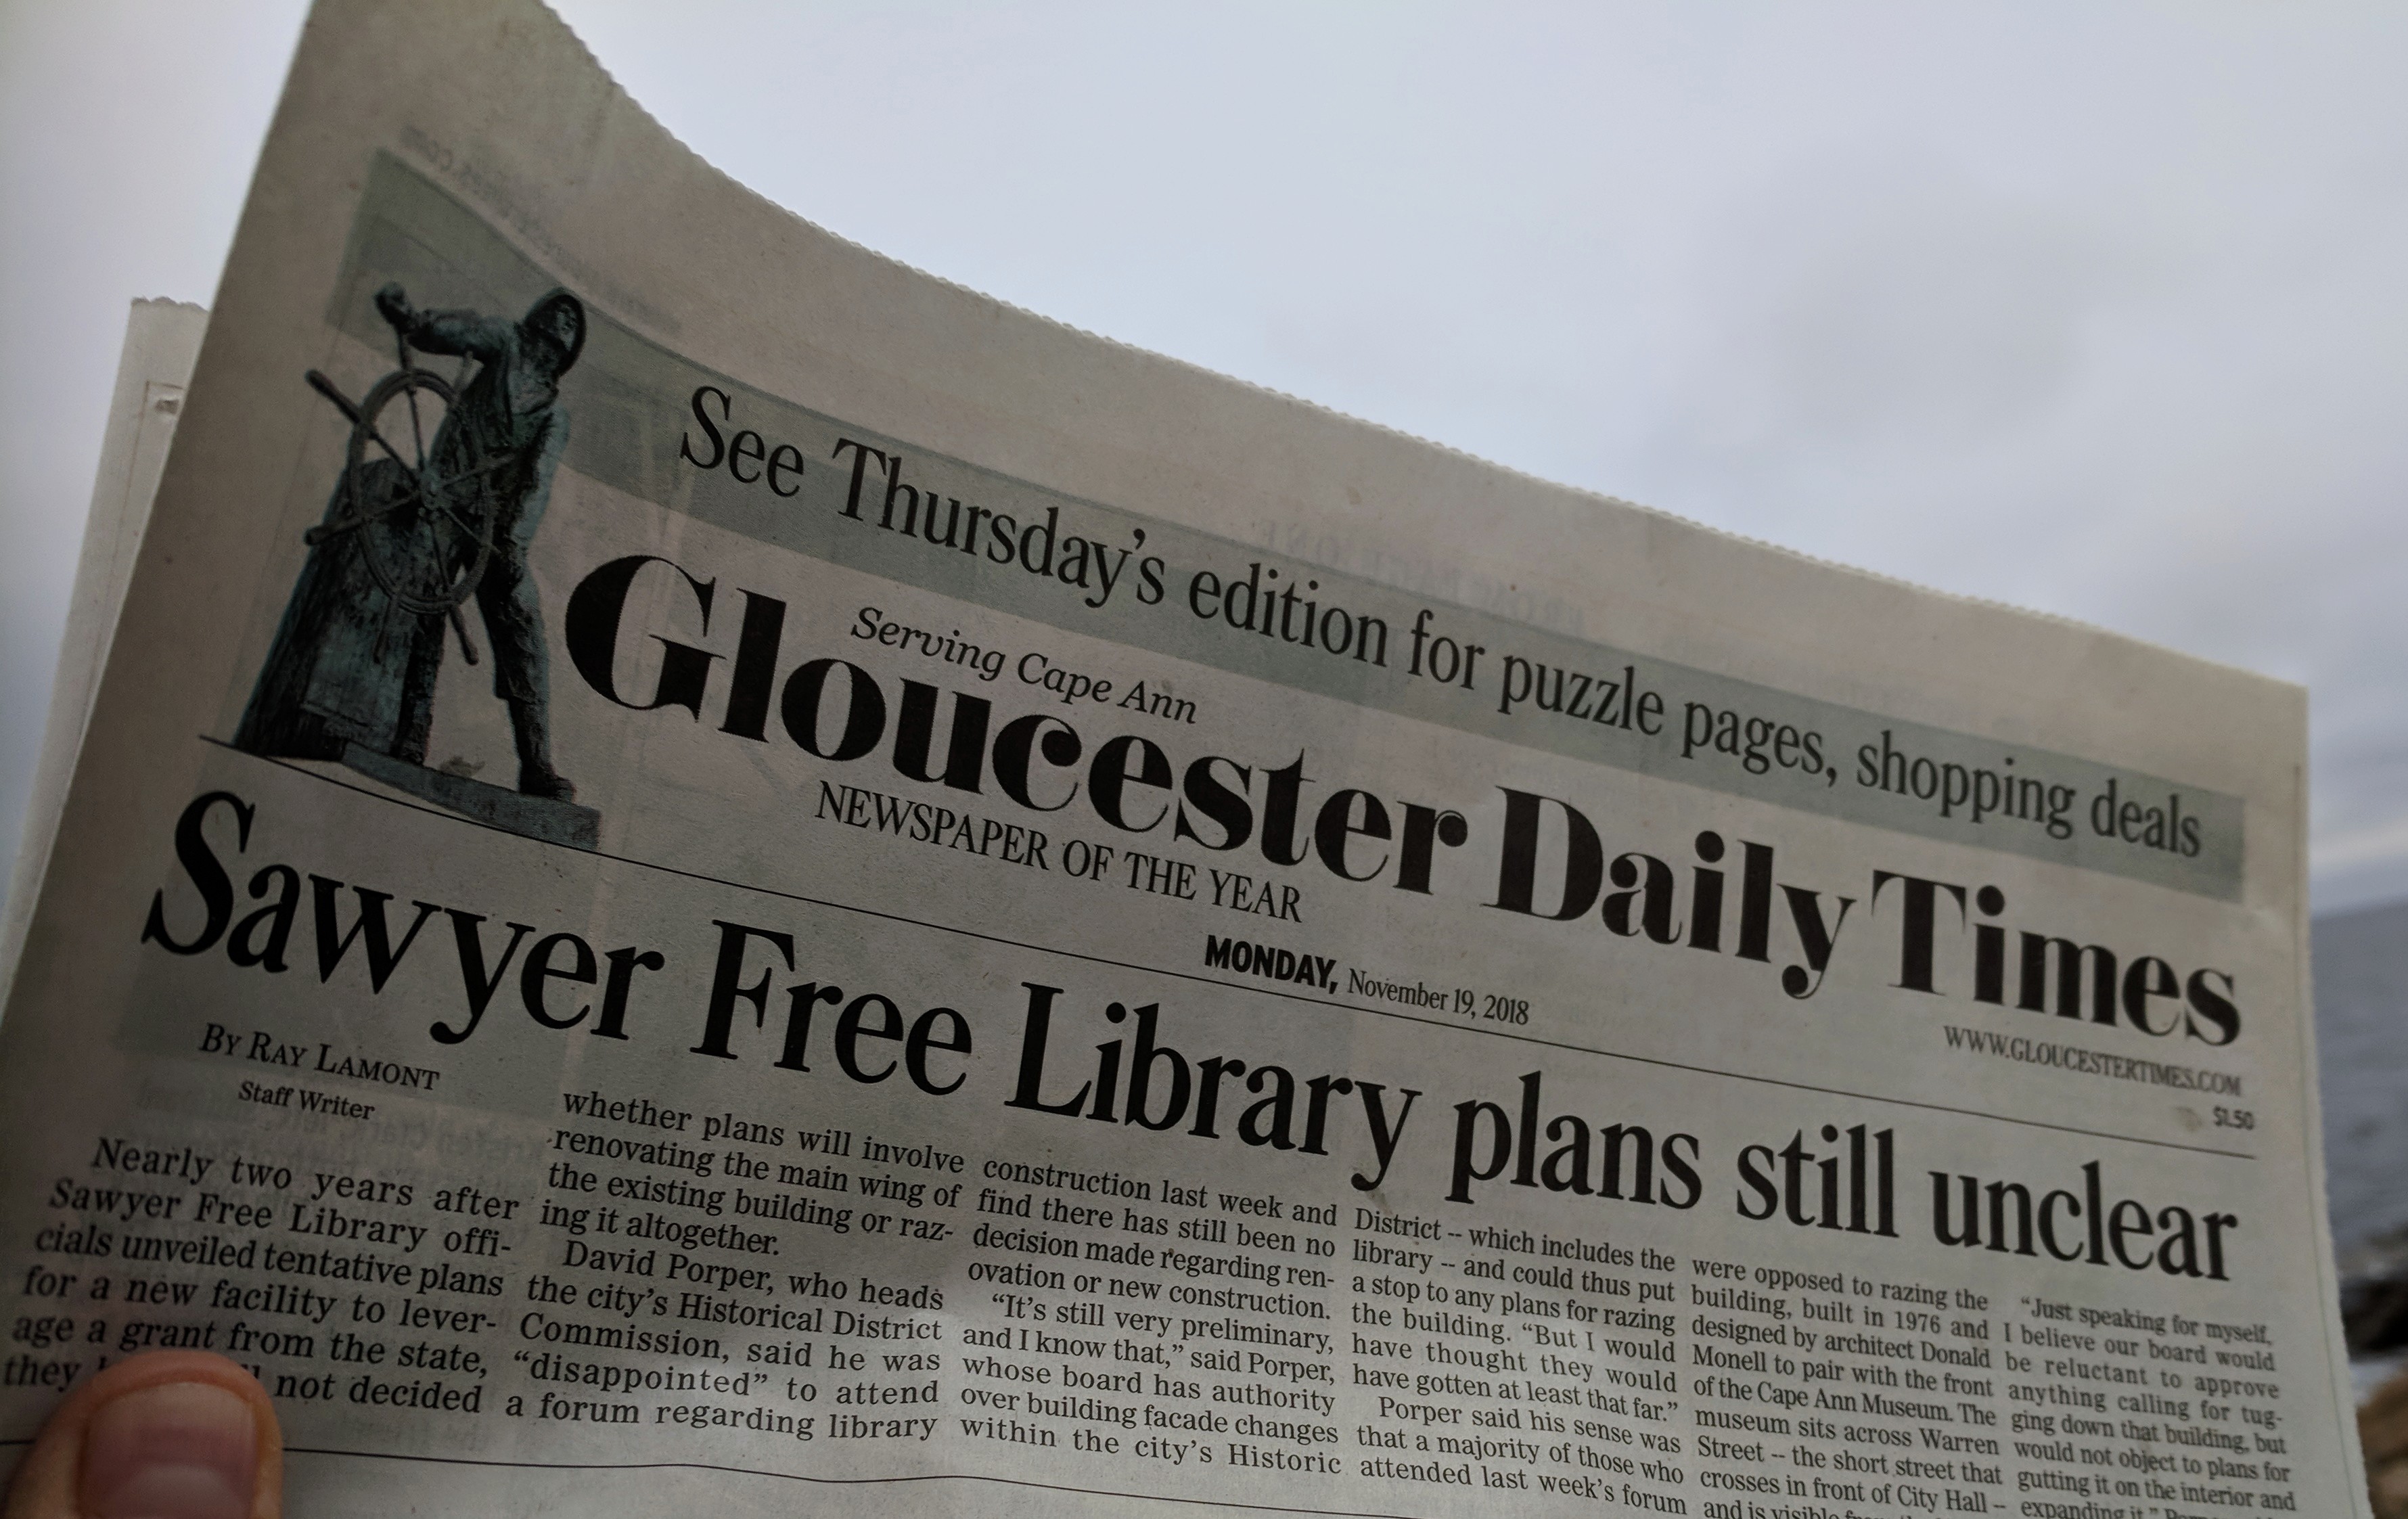 Ray Lamont article above the fold_library building plans update_Gloucester Daily Times_20181120_©c ryan